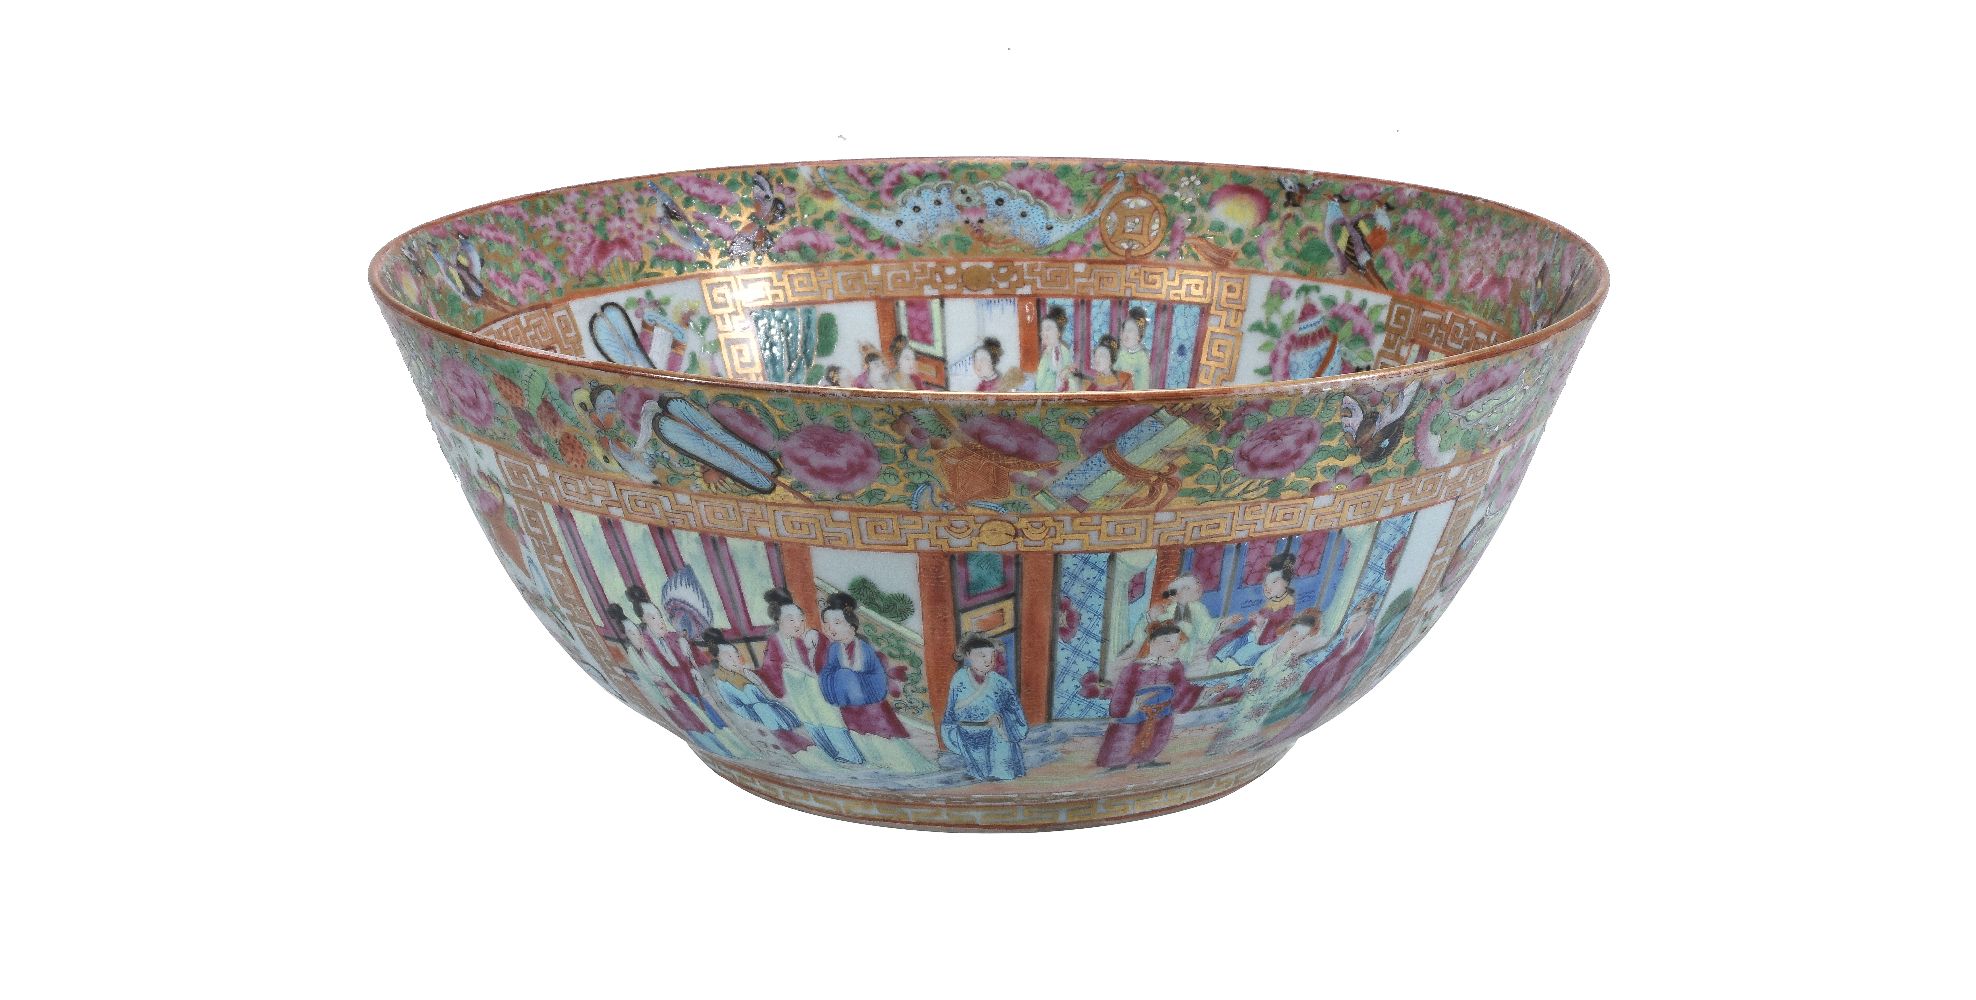 A Cantonese Famille Rose punch bowl - Image 5 of 6